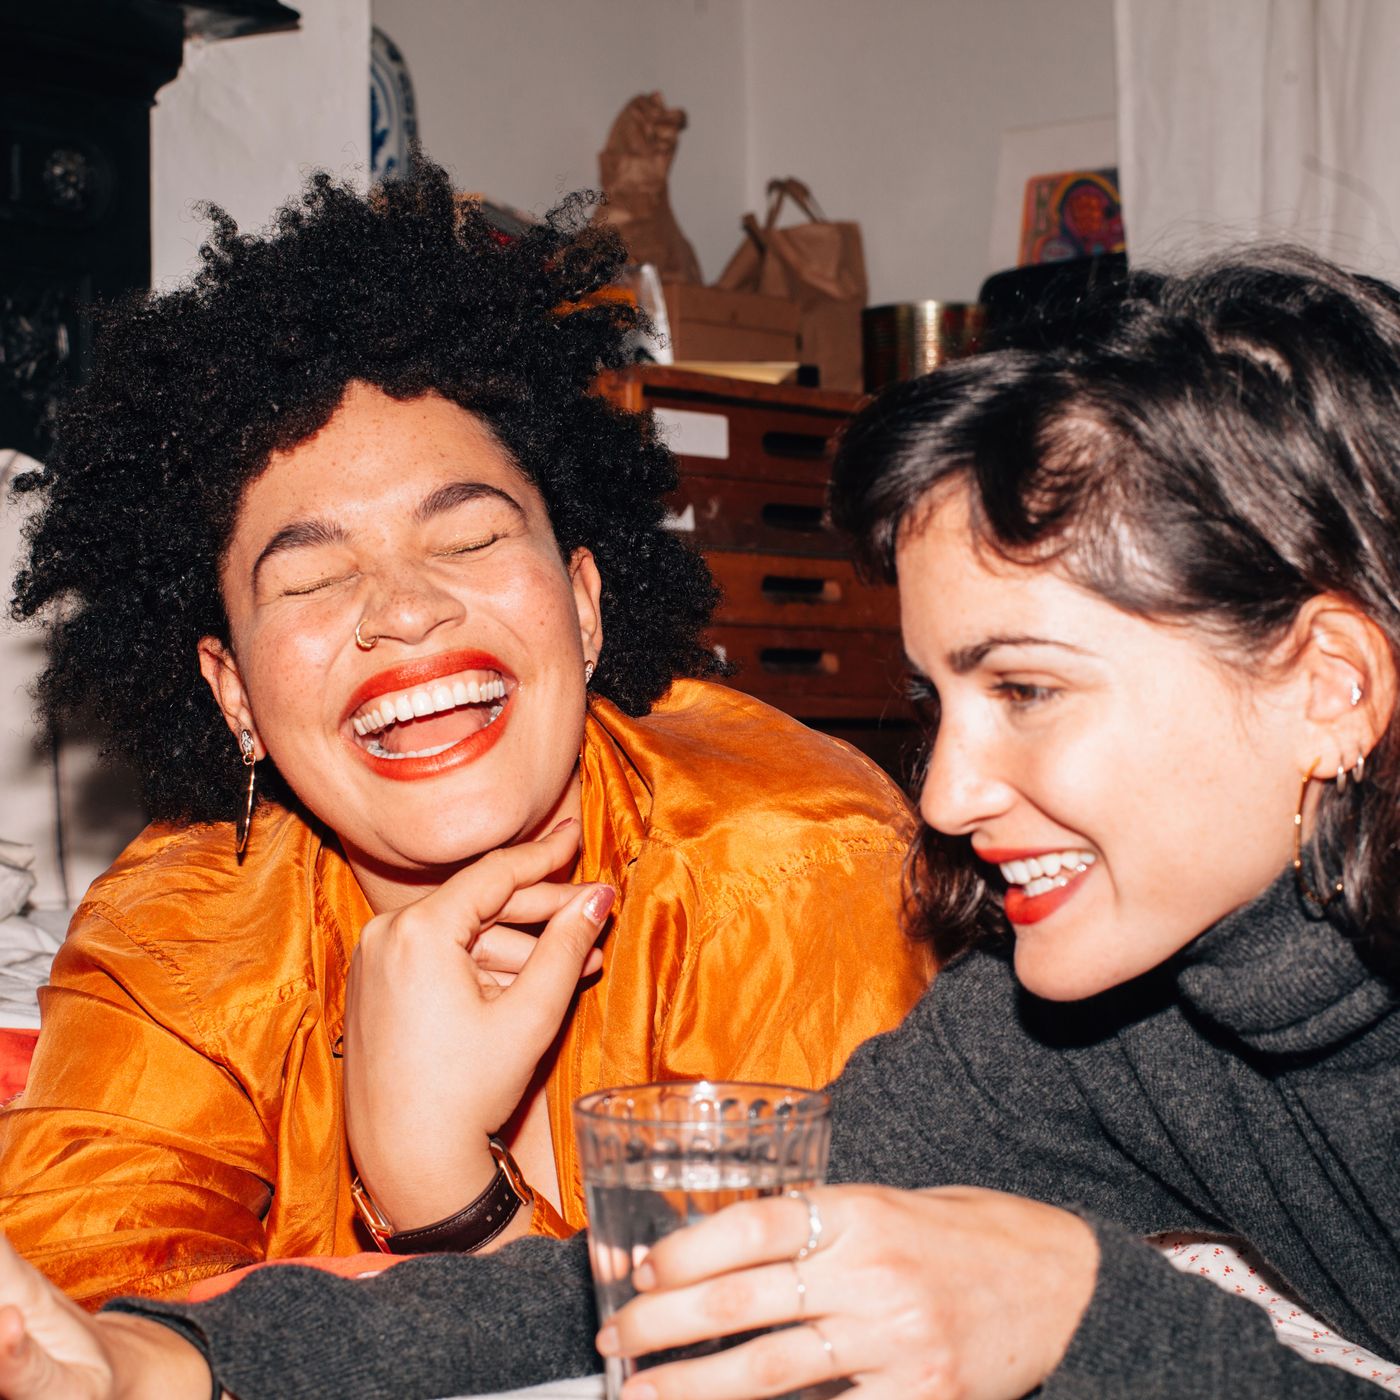 60 Questions for Couples to Get to Know Each Other Better